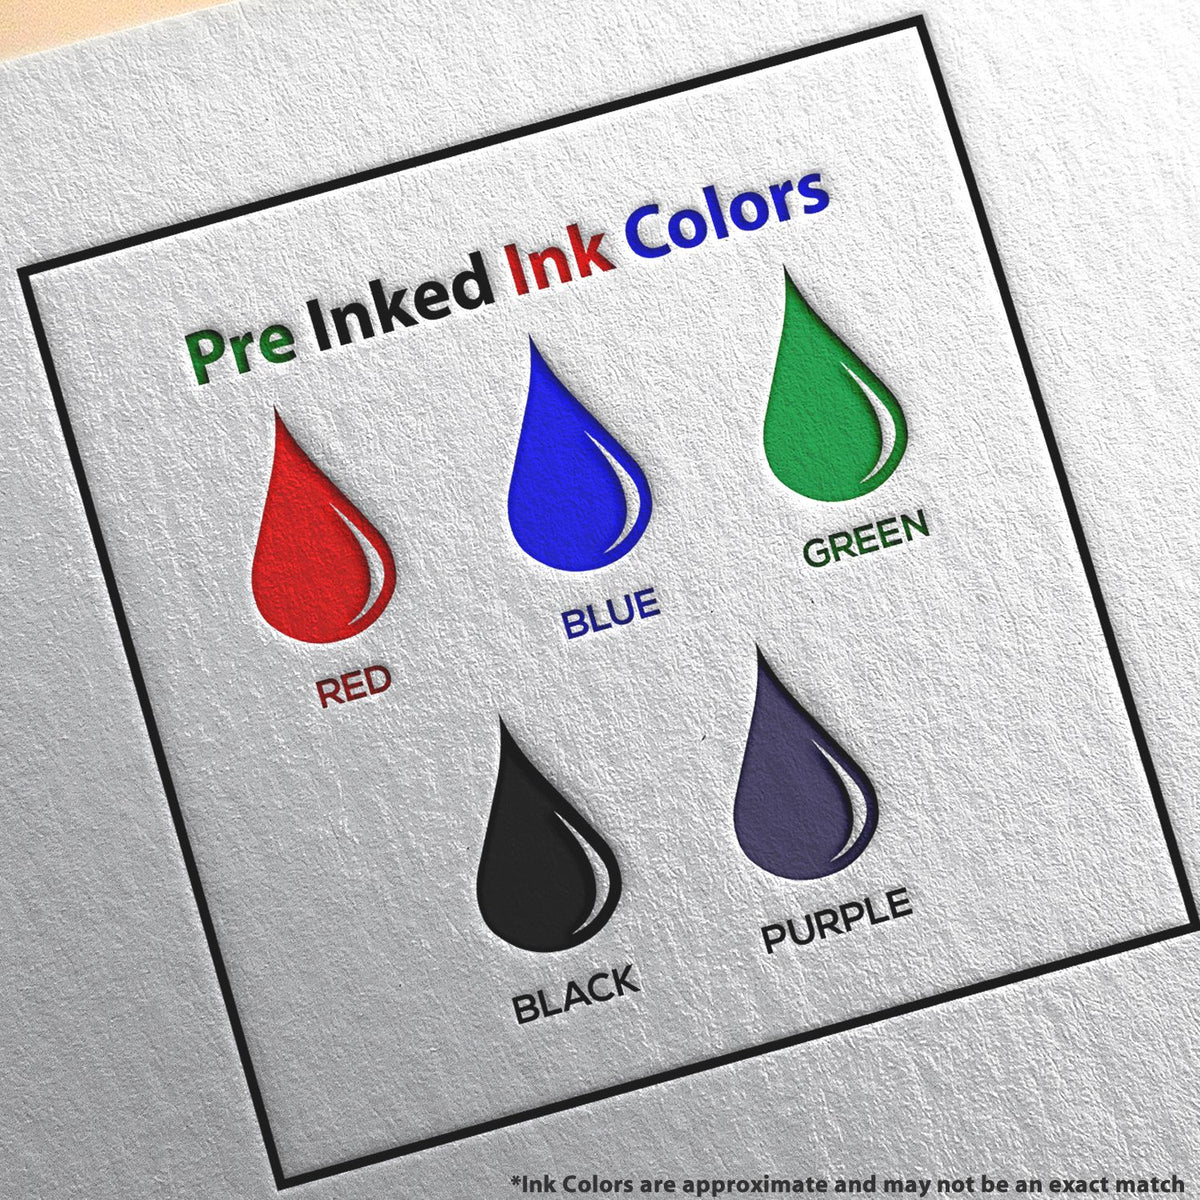 A picture showing the different ink colors or hues available for the Slim Pre-Inked Indiana Landscape Architect Seal Stamp product.